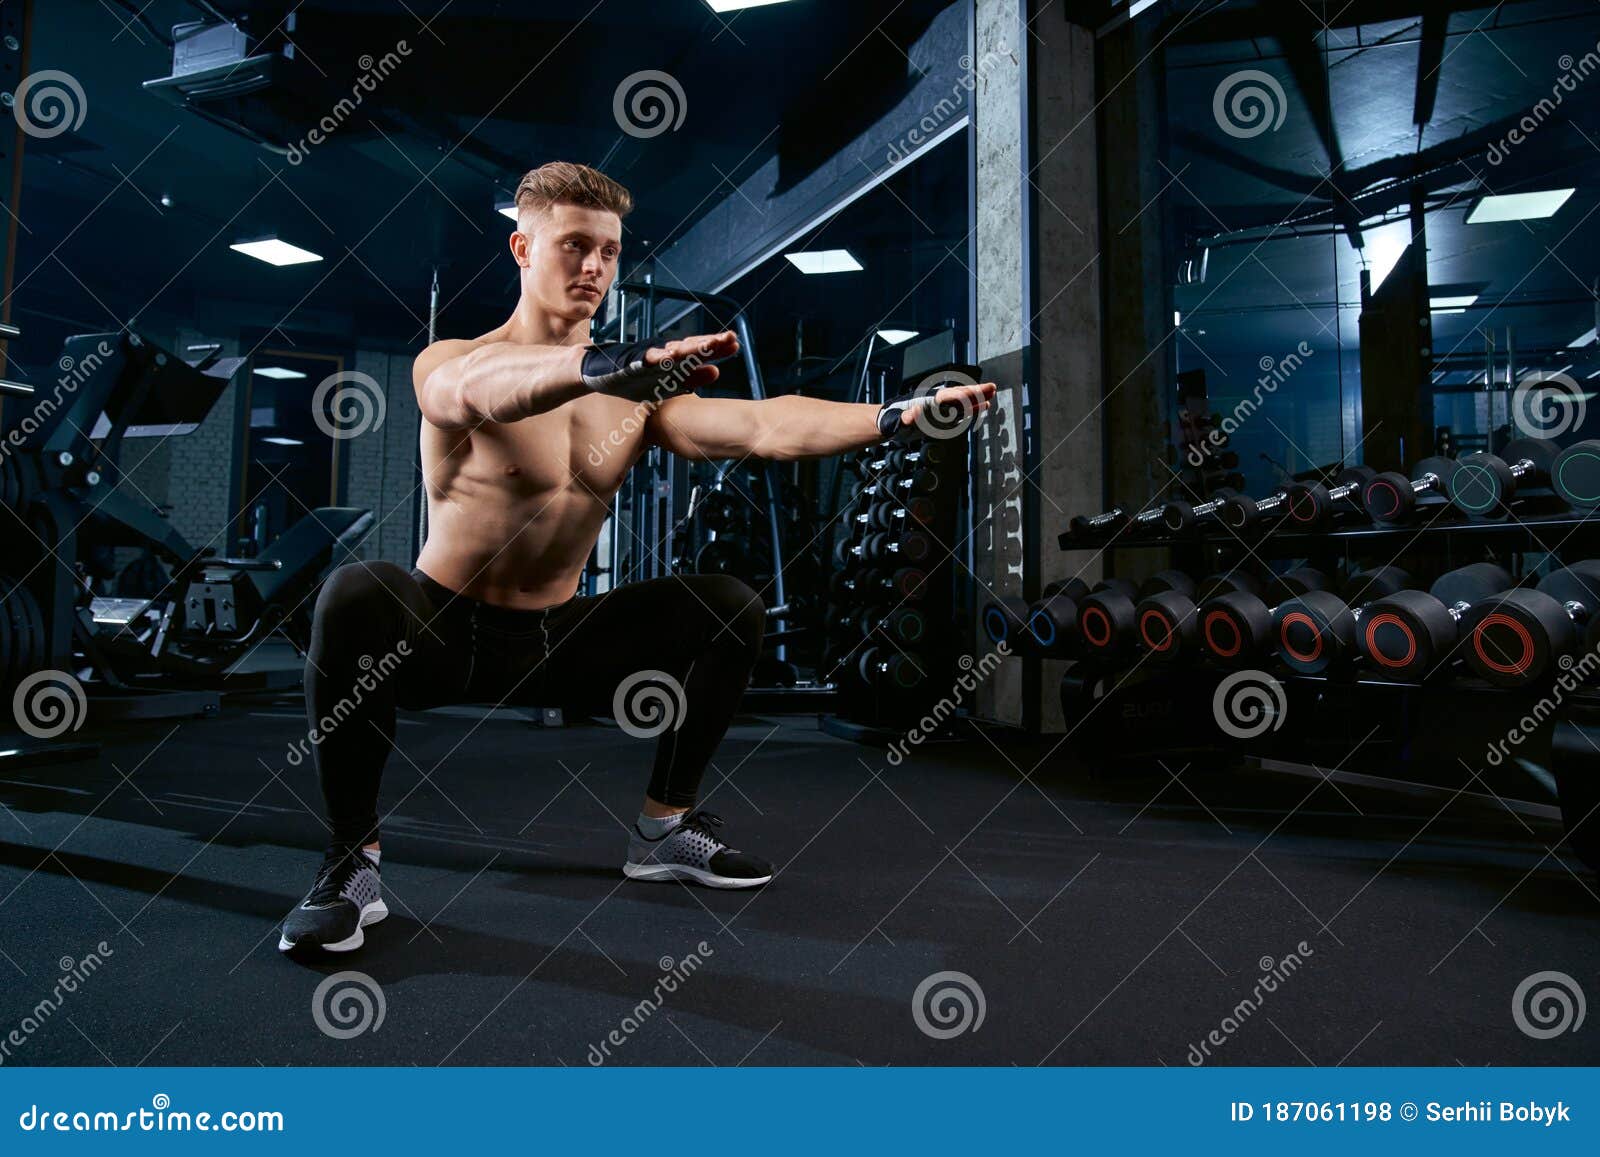 Sportsman Doing Squats in Stock Photo - Image of bodybuilder, health: 187061198